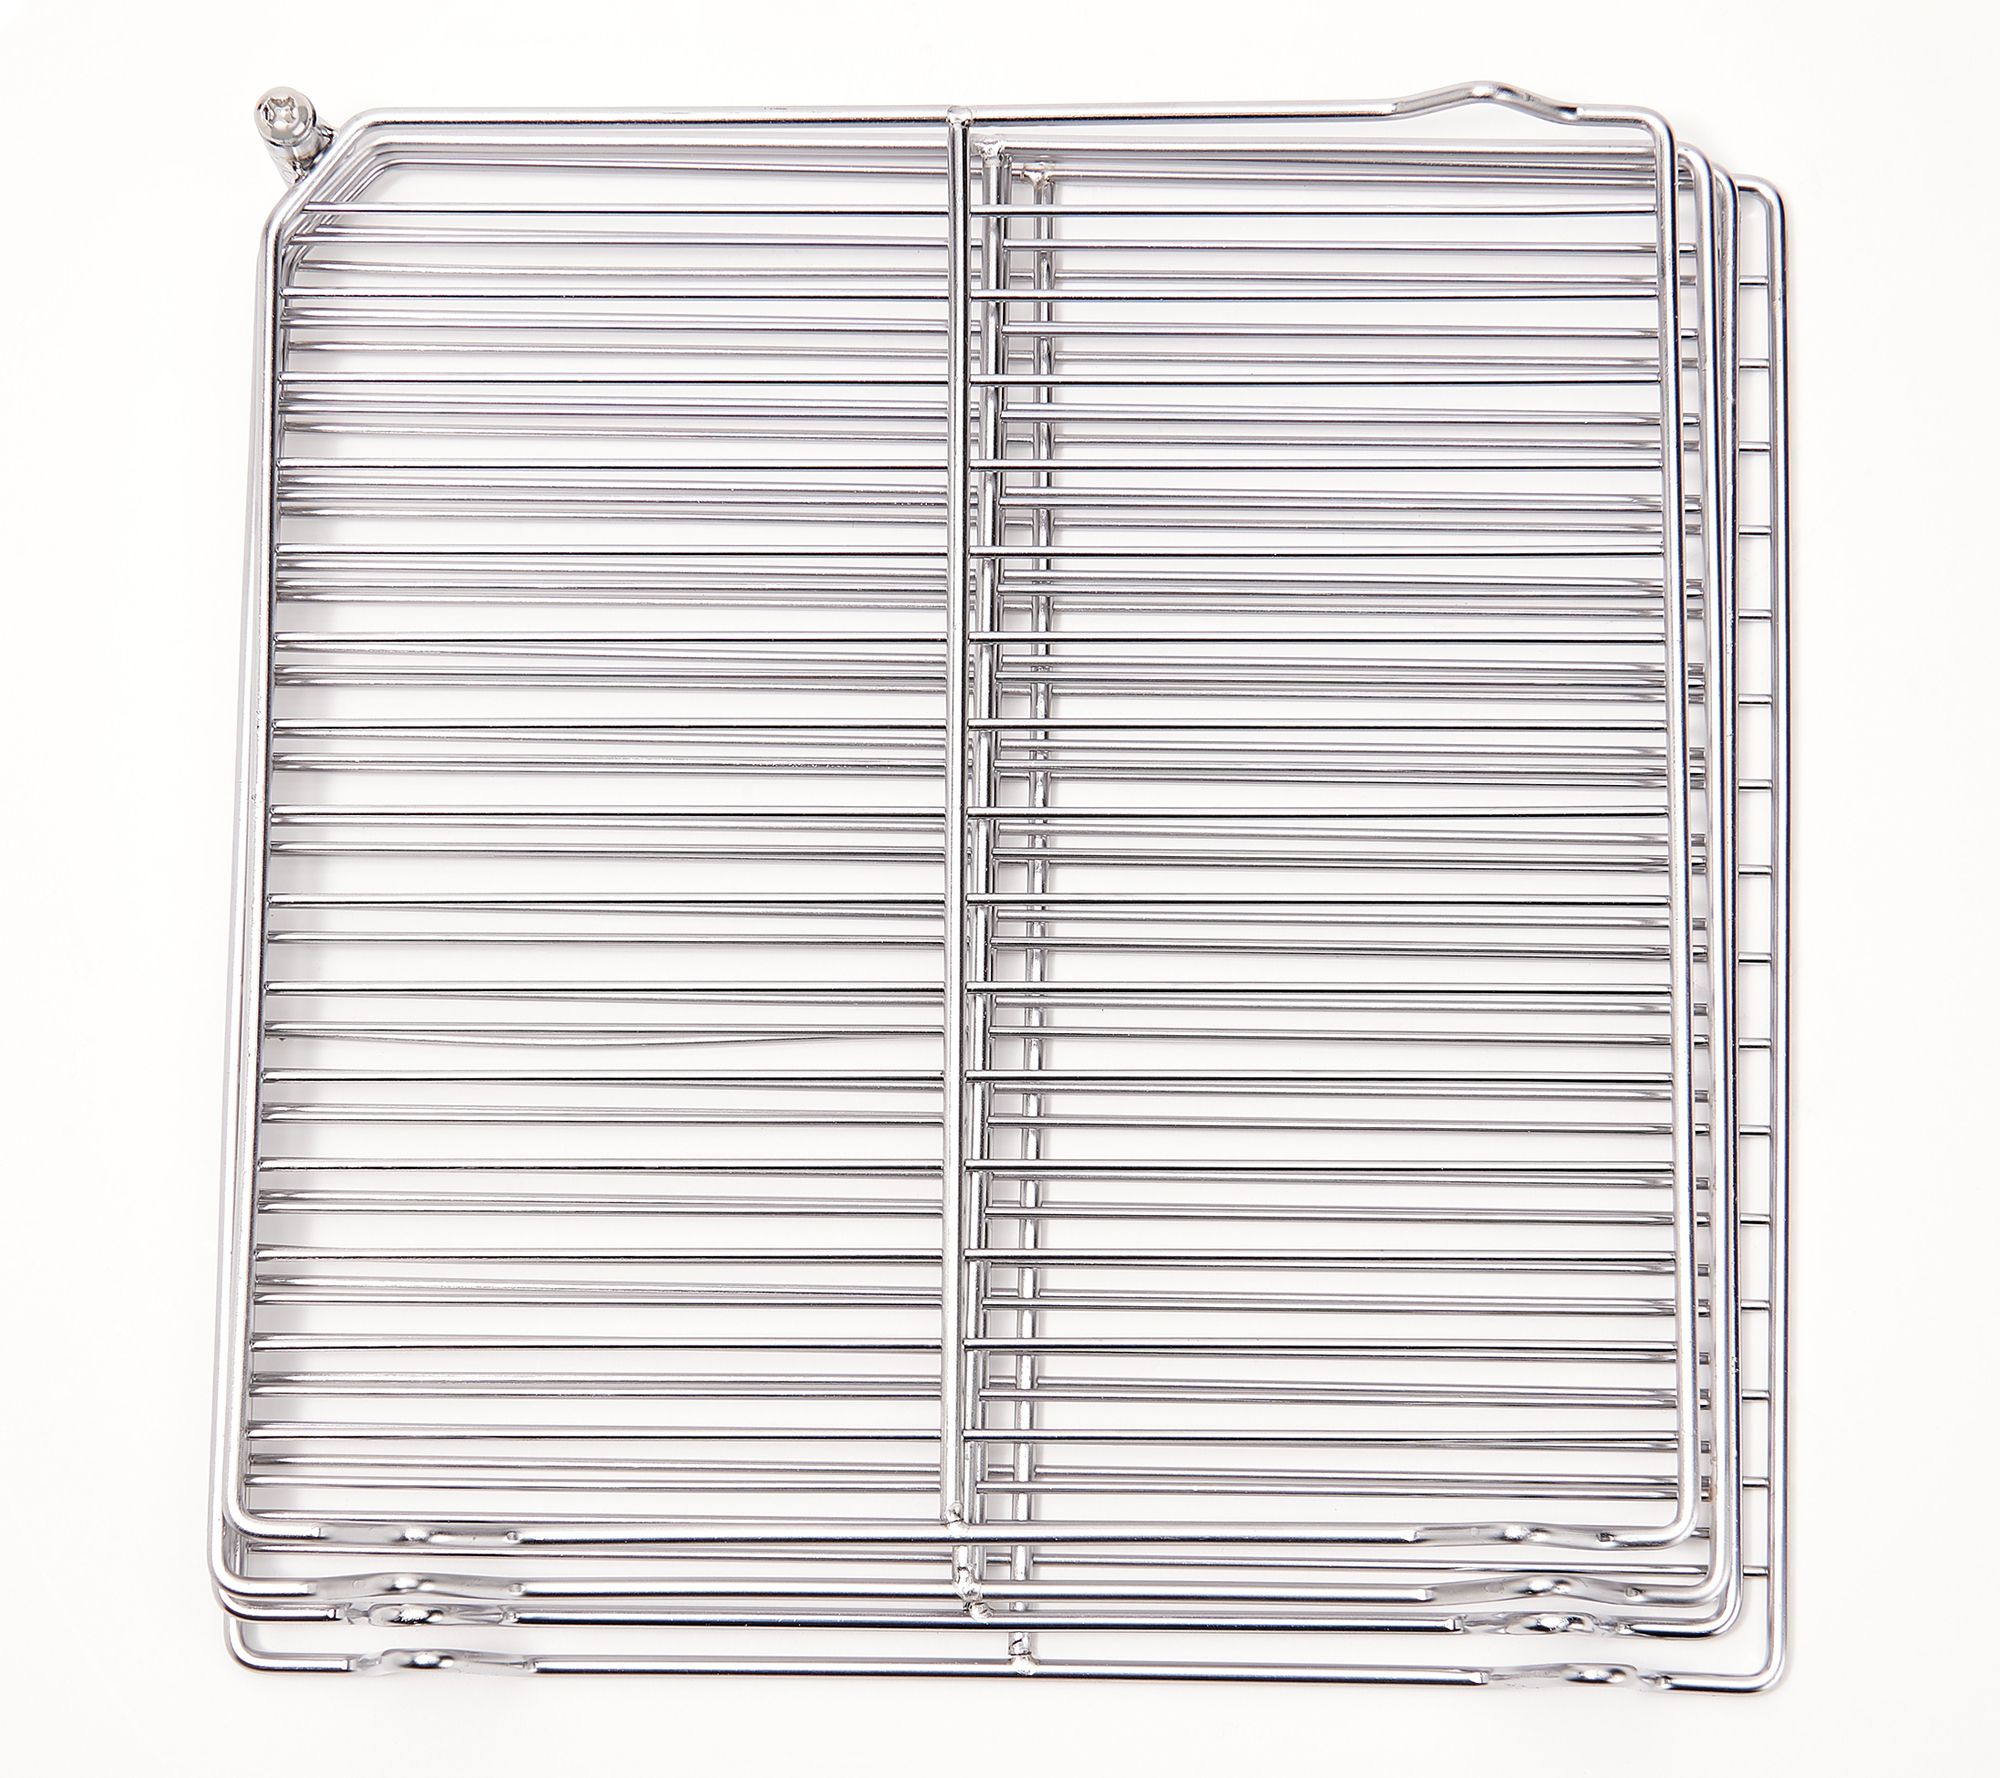 Stainless steel wire cooling rack on sale, Stainless steel cooling